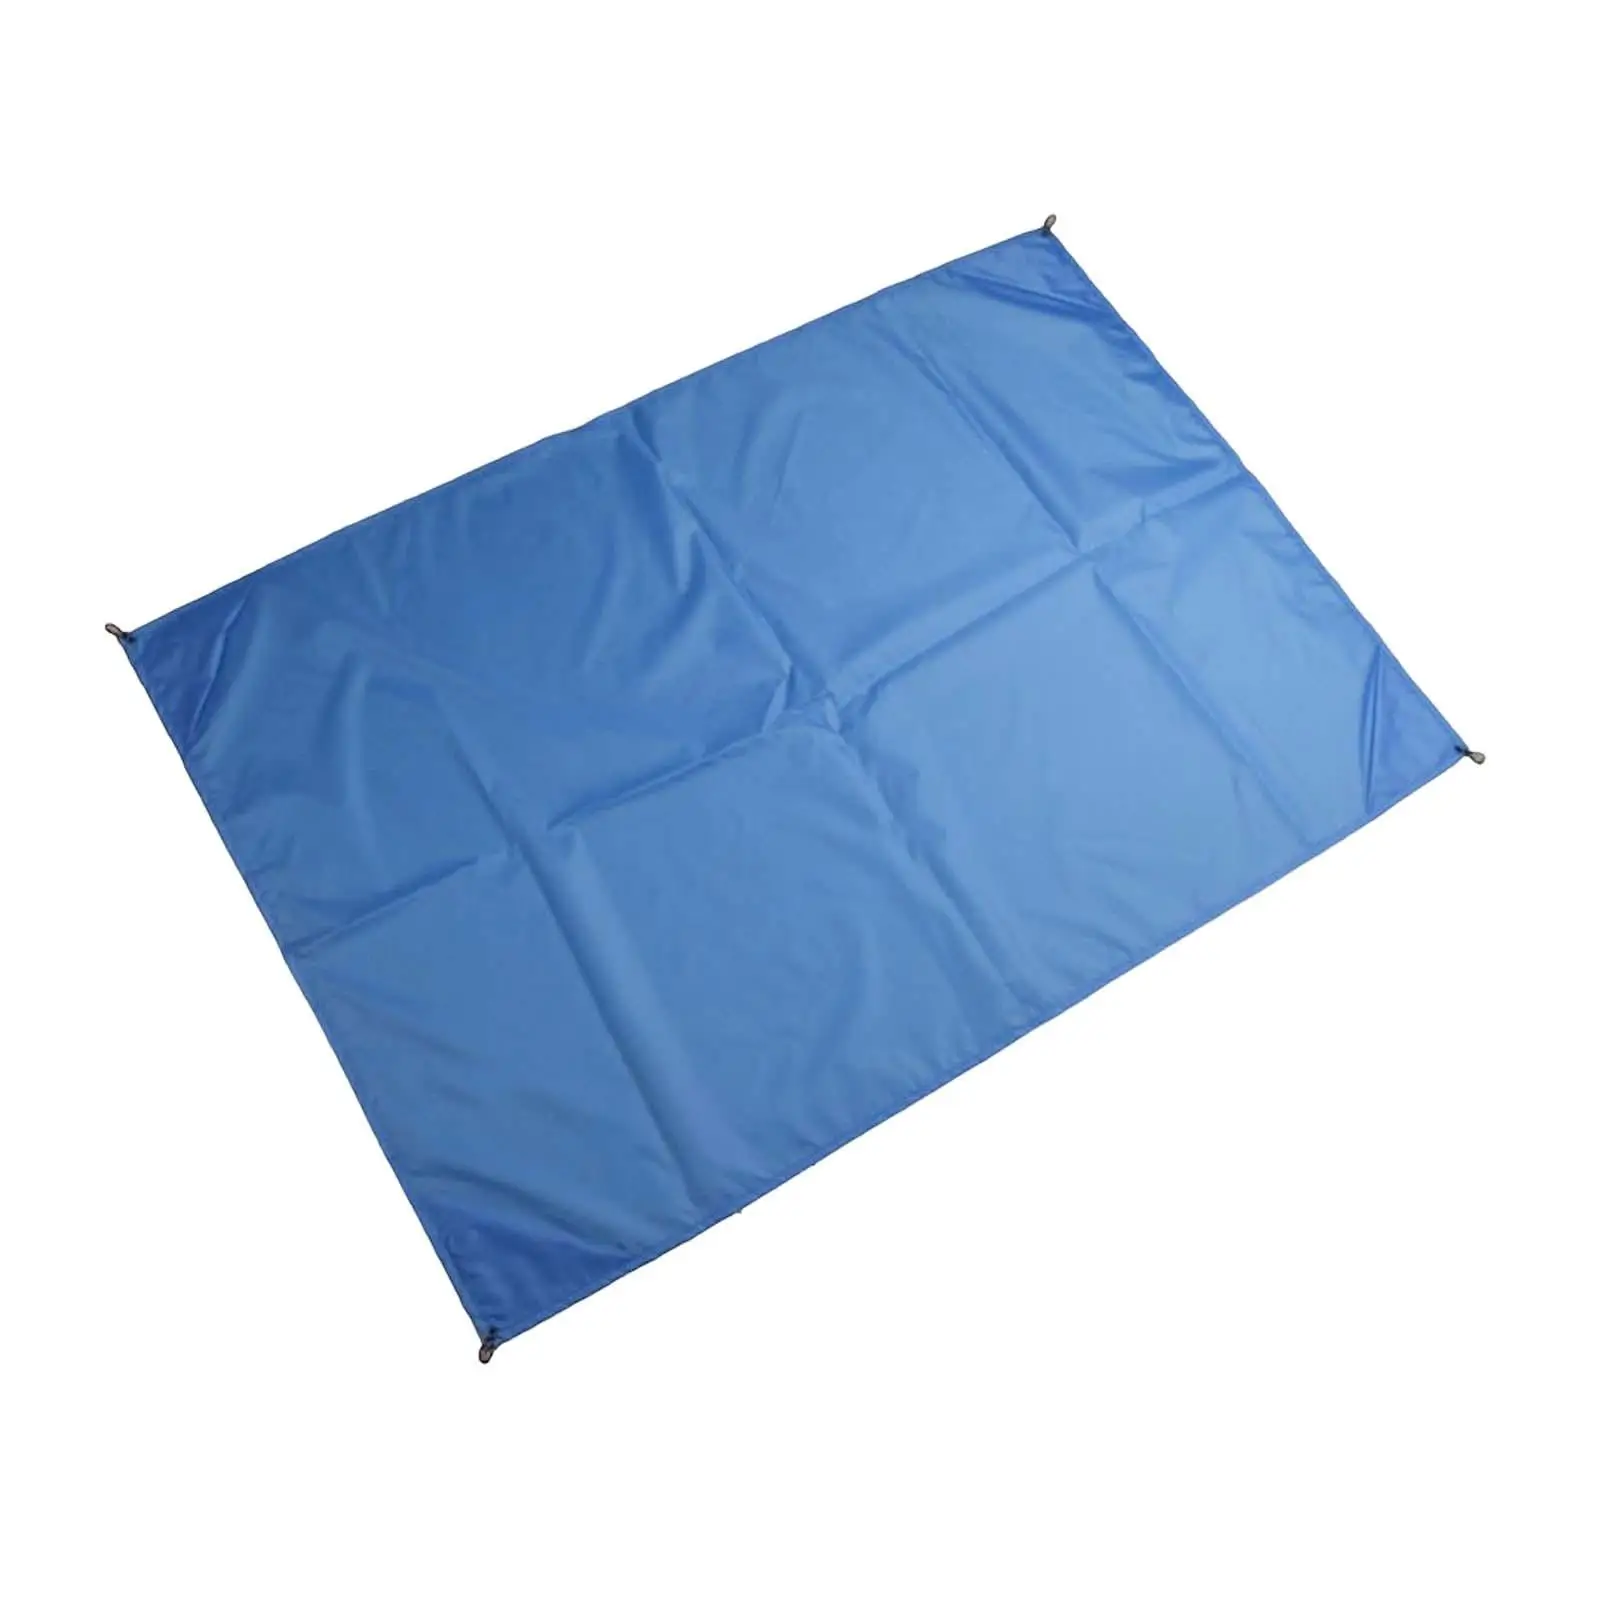 Pocket Picnic Blanket Sand Proof Foldable Waterproof Durable Compact Camping